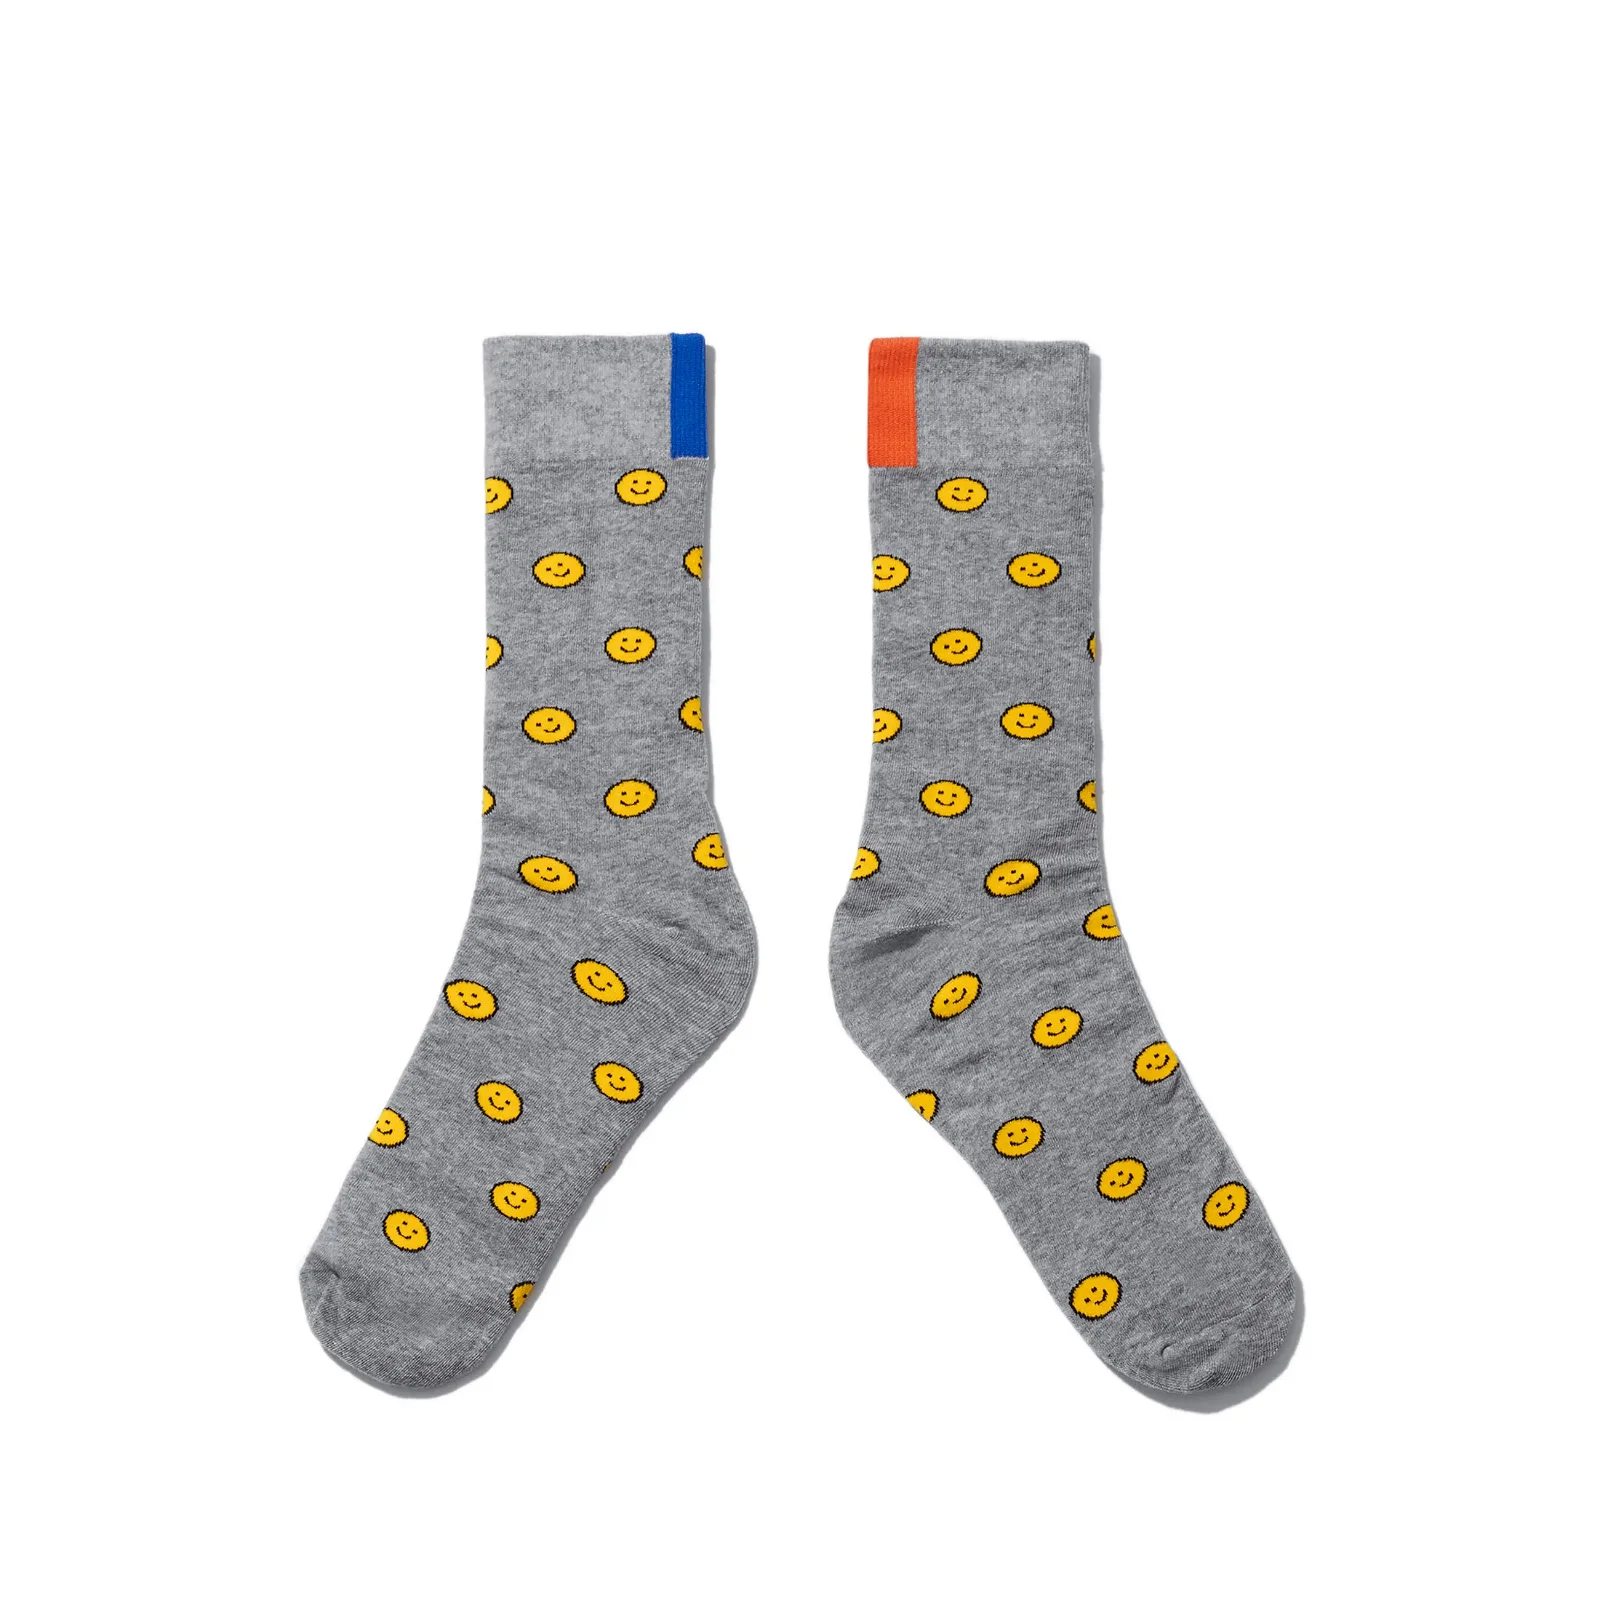 Image of The Women's All Over Smiles Dress Sock - Heather Grey